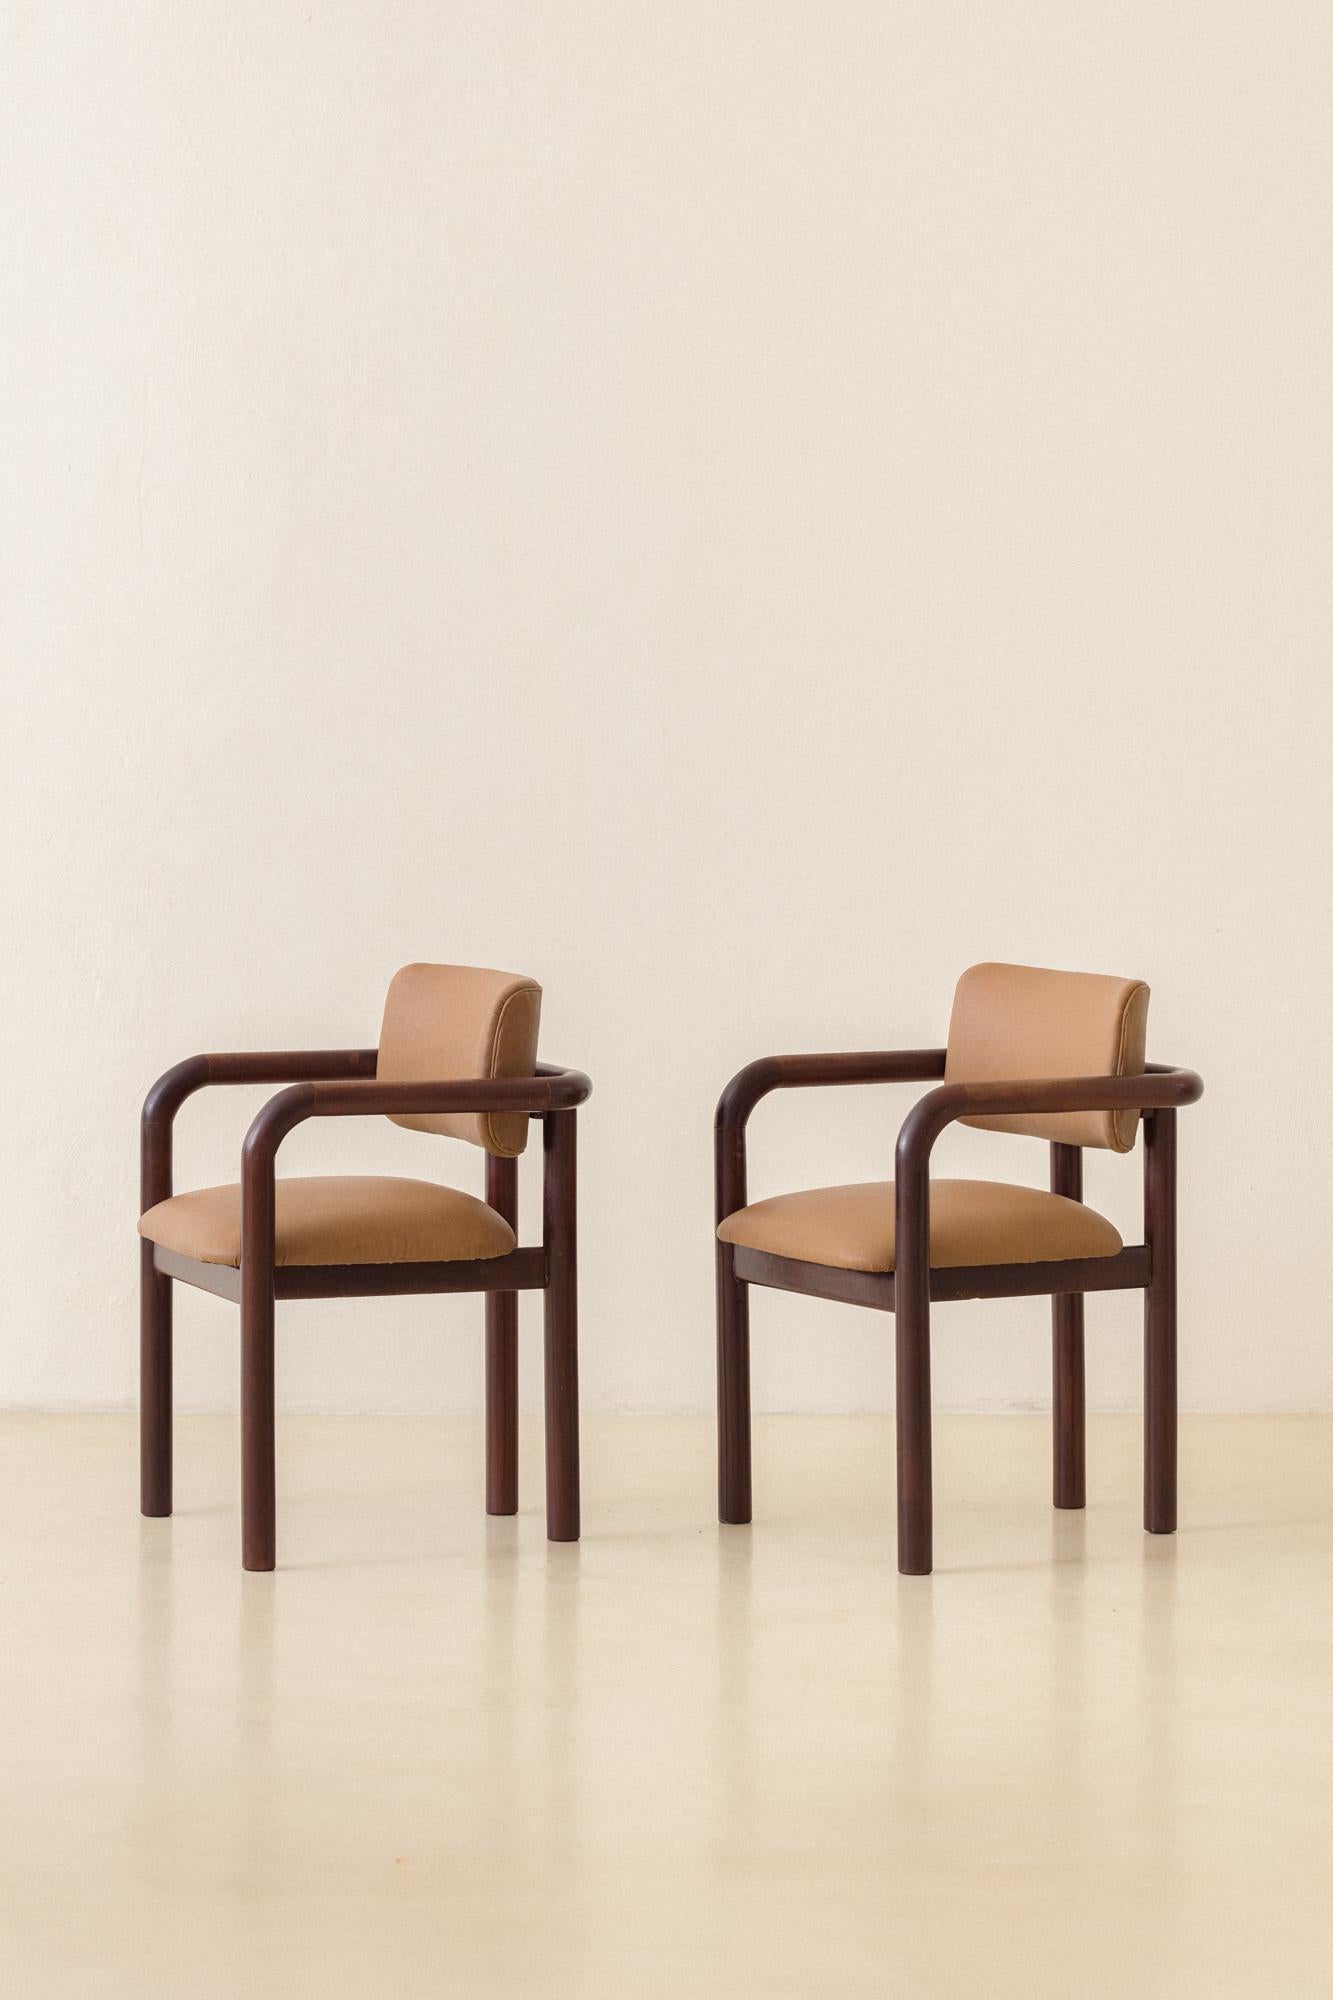 Brazilian Midcentury Design, Solid Imbuia Dining Chairs with Armrests, 1950s For Sale 3